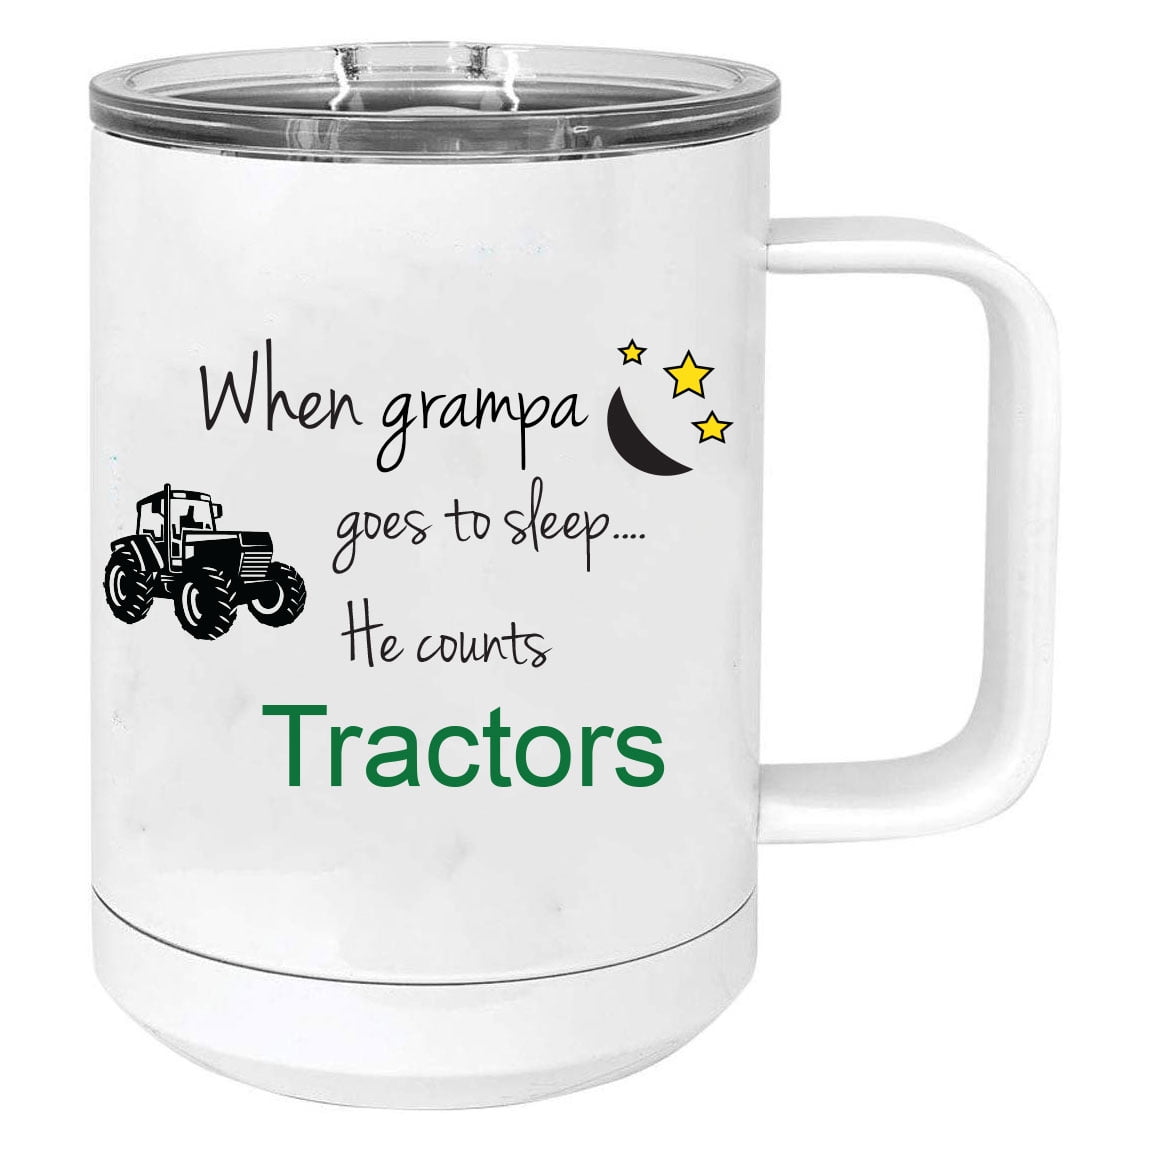 When Grampa goes to sleep he counts tractors Stainless Steel Vacuum Insulated 15 Oz Travel Coffee Mug with Slider Lid, White